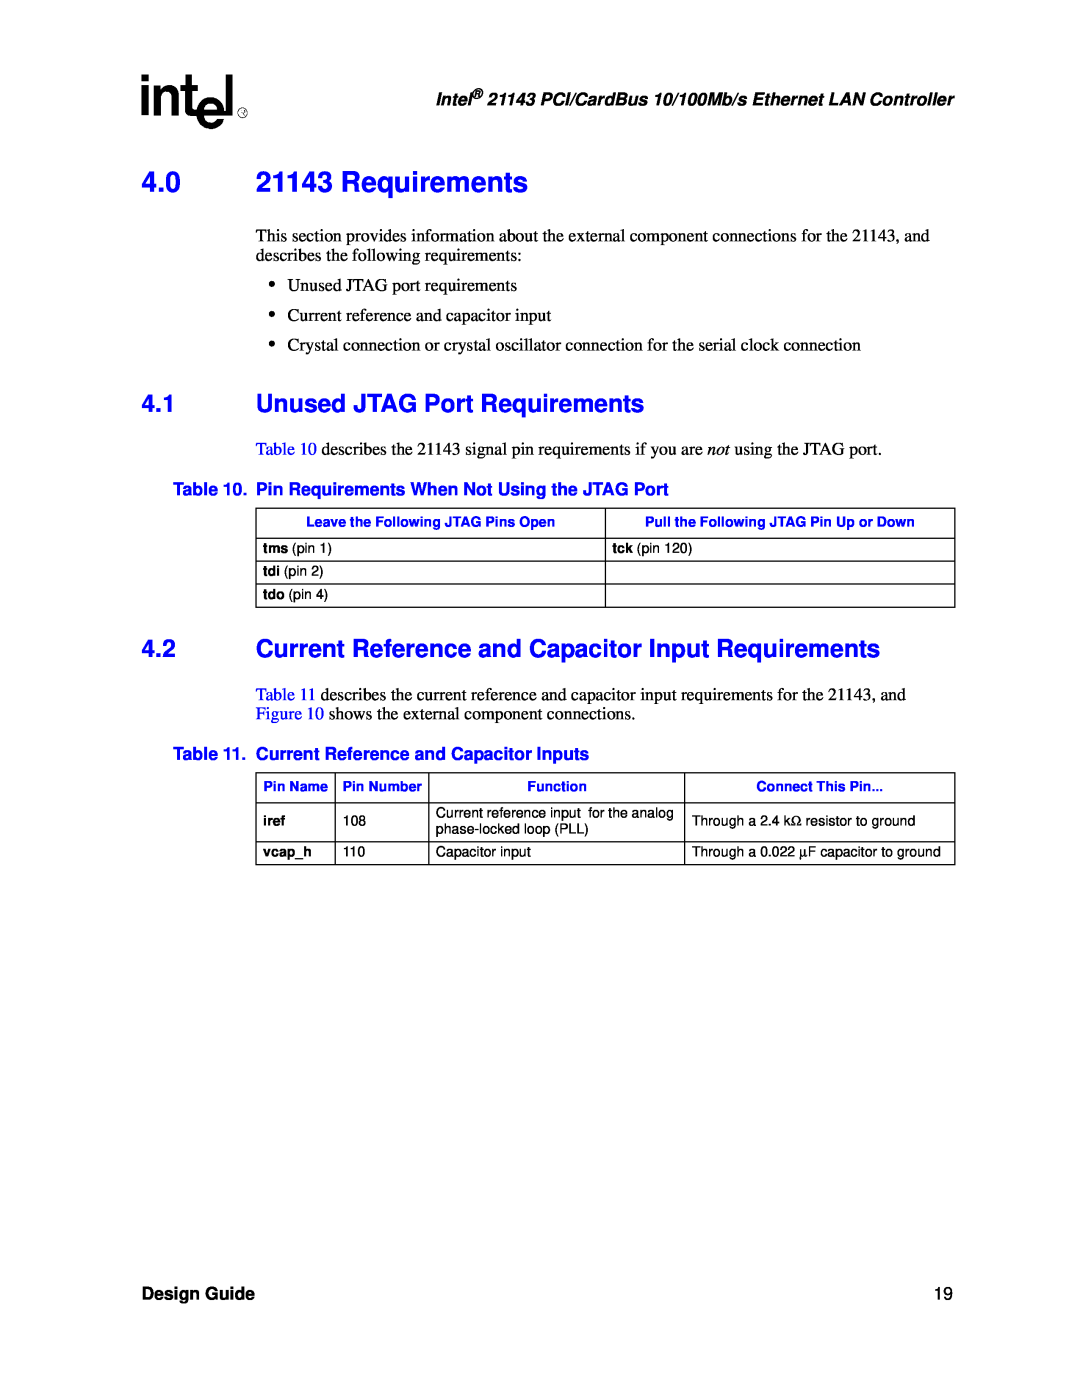 Intel manual 4.0 21143 Requirements, Unused JTAG Port Requirements, Current Reference and Capacitor Input Requirements 